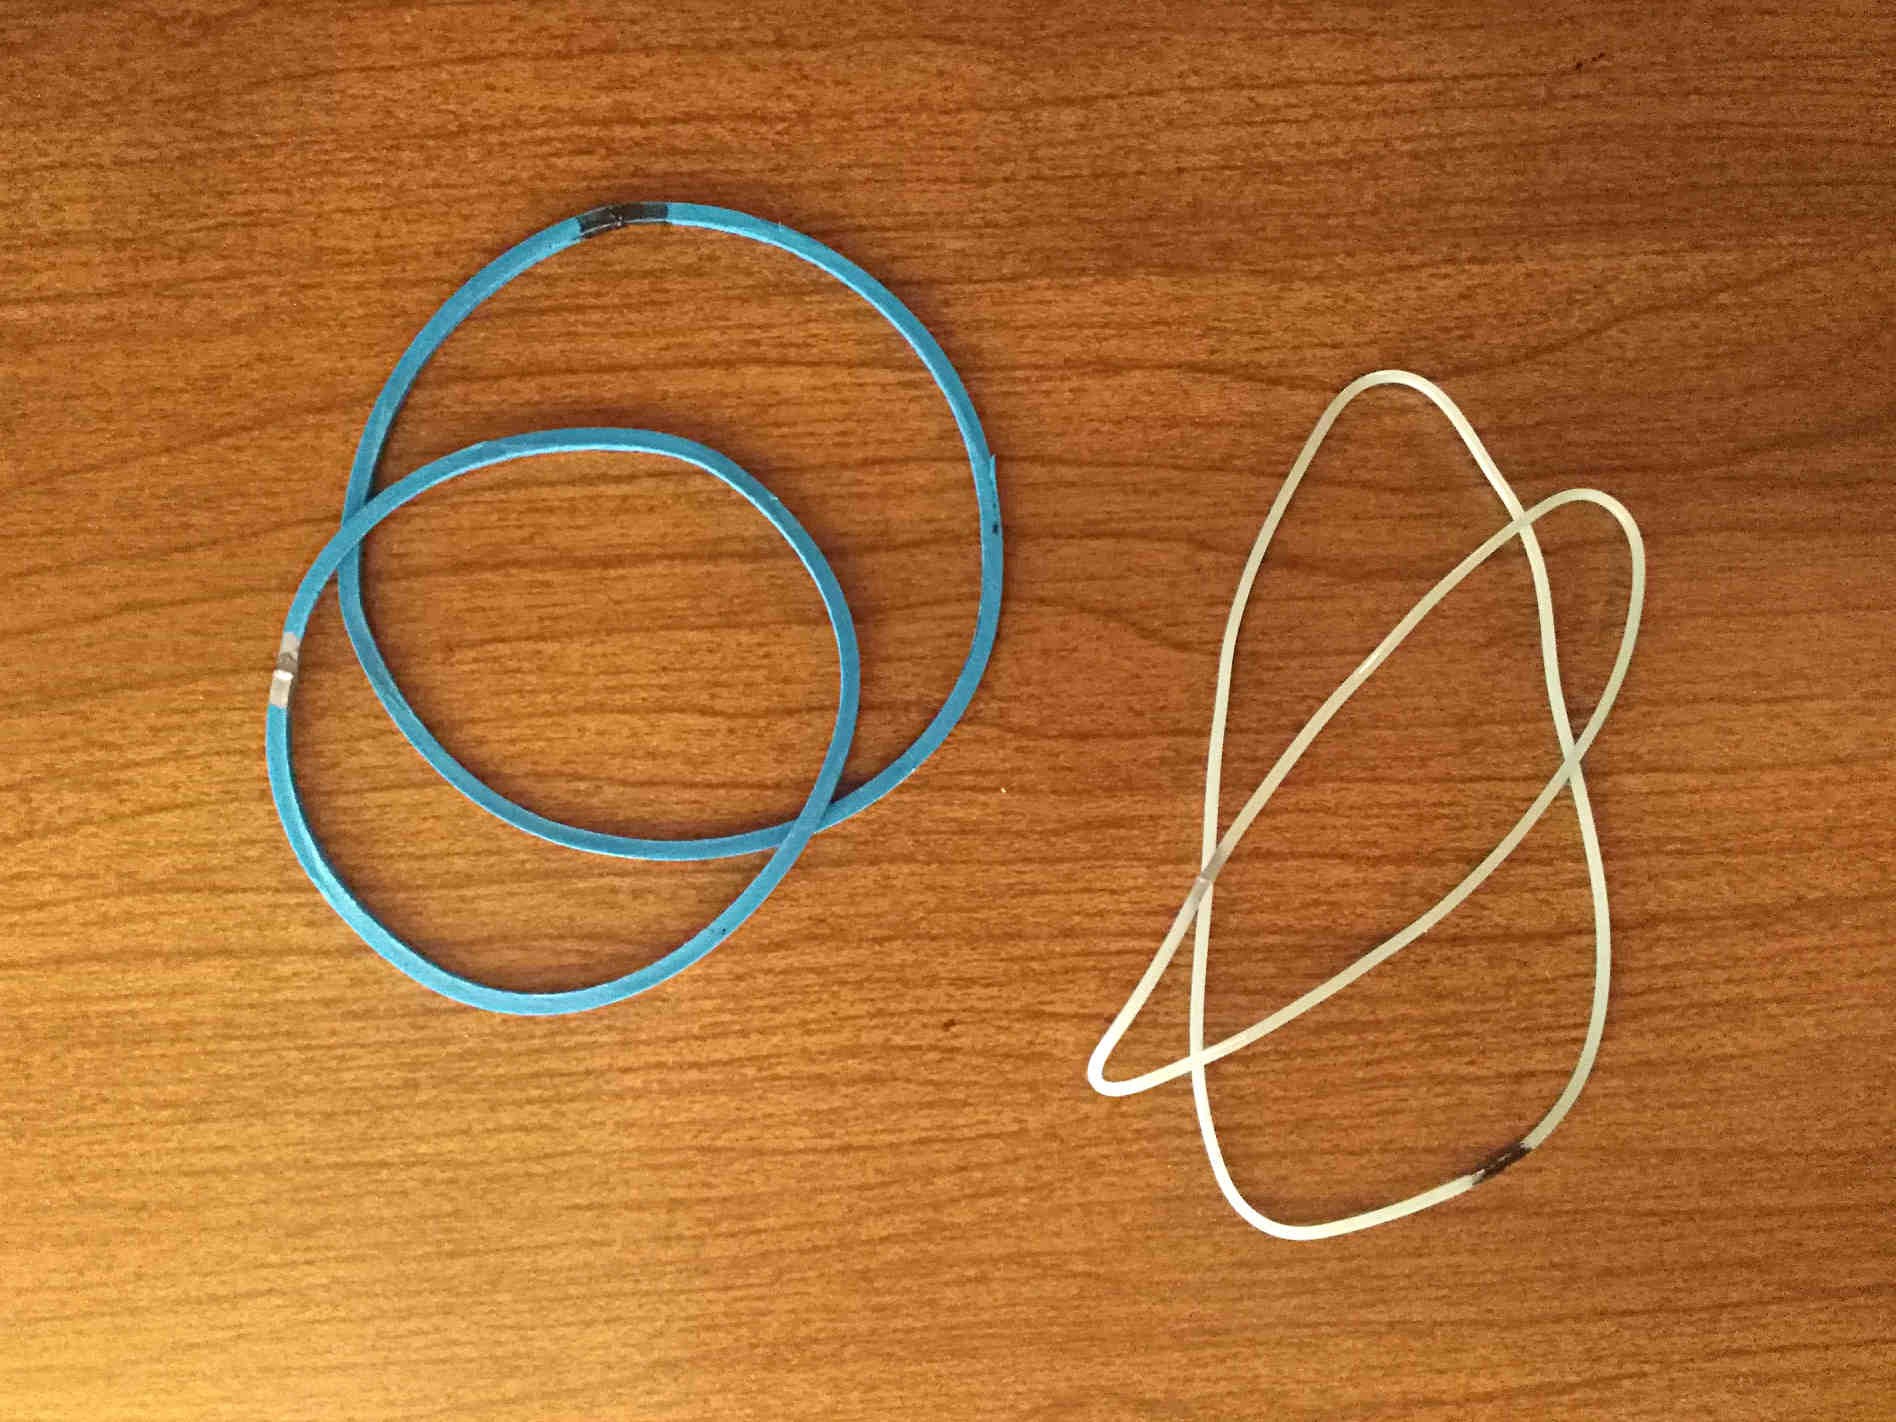 Rubber band belts next to elastic belts